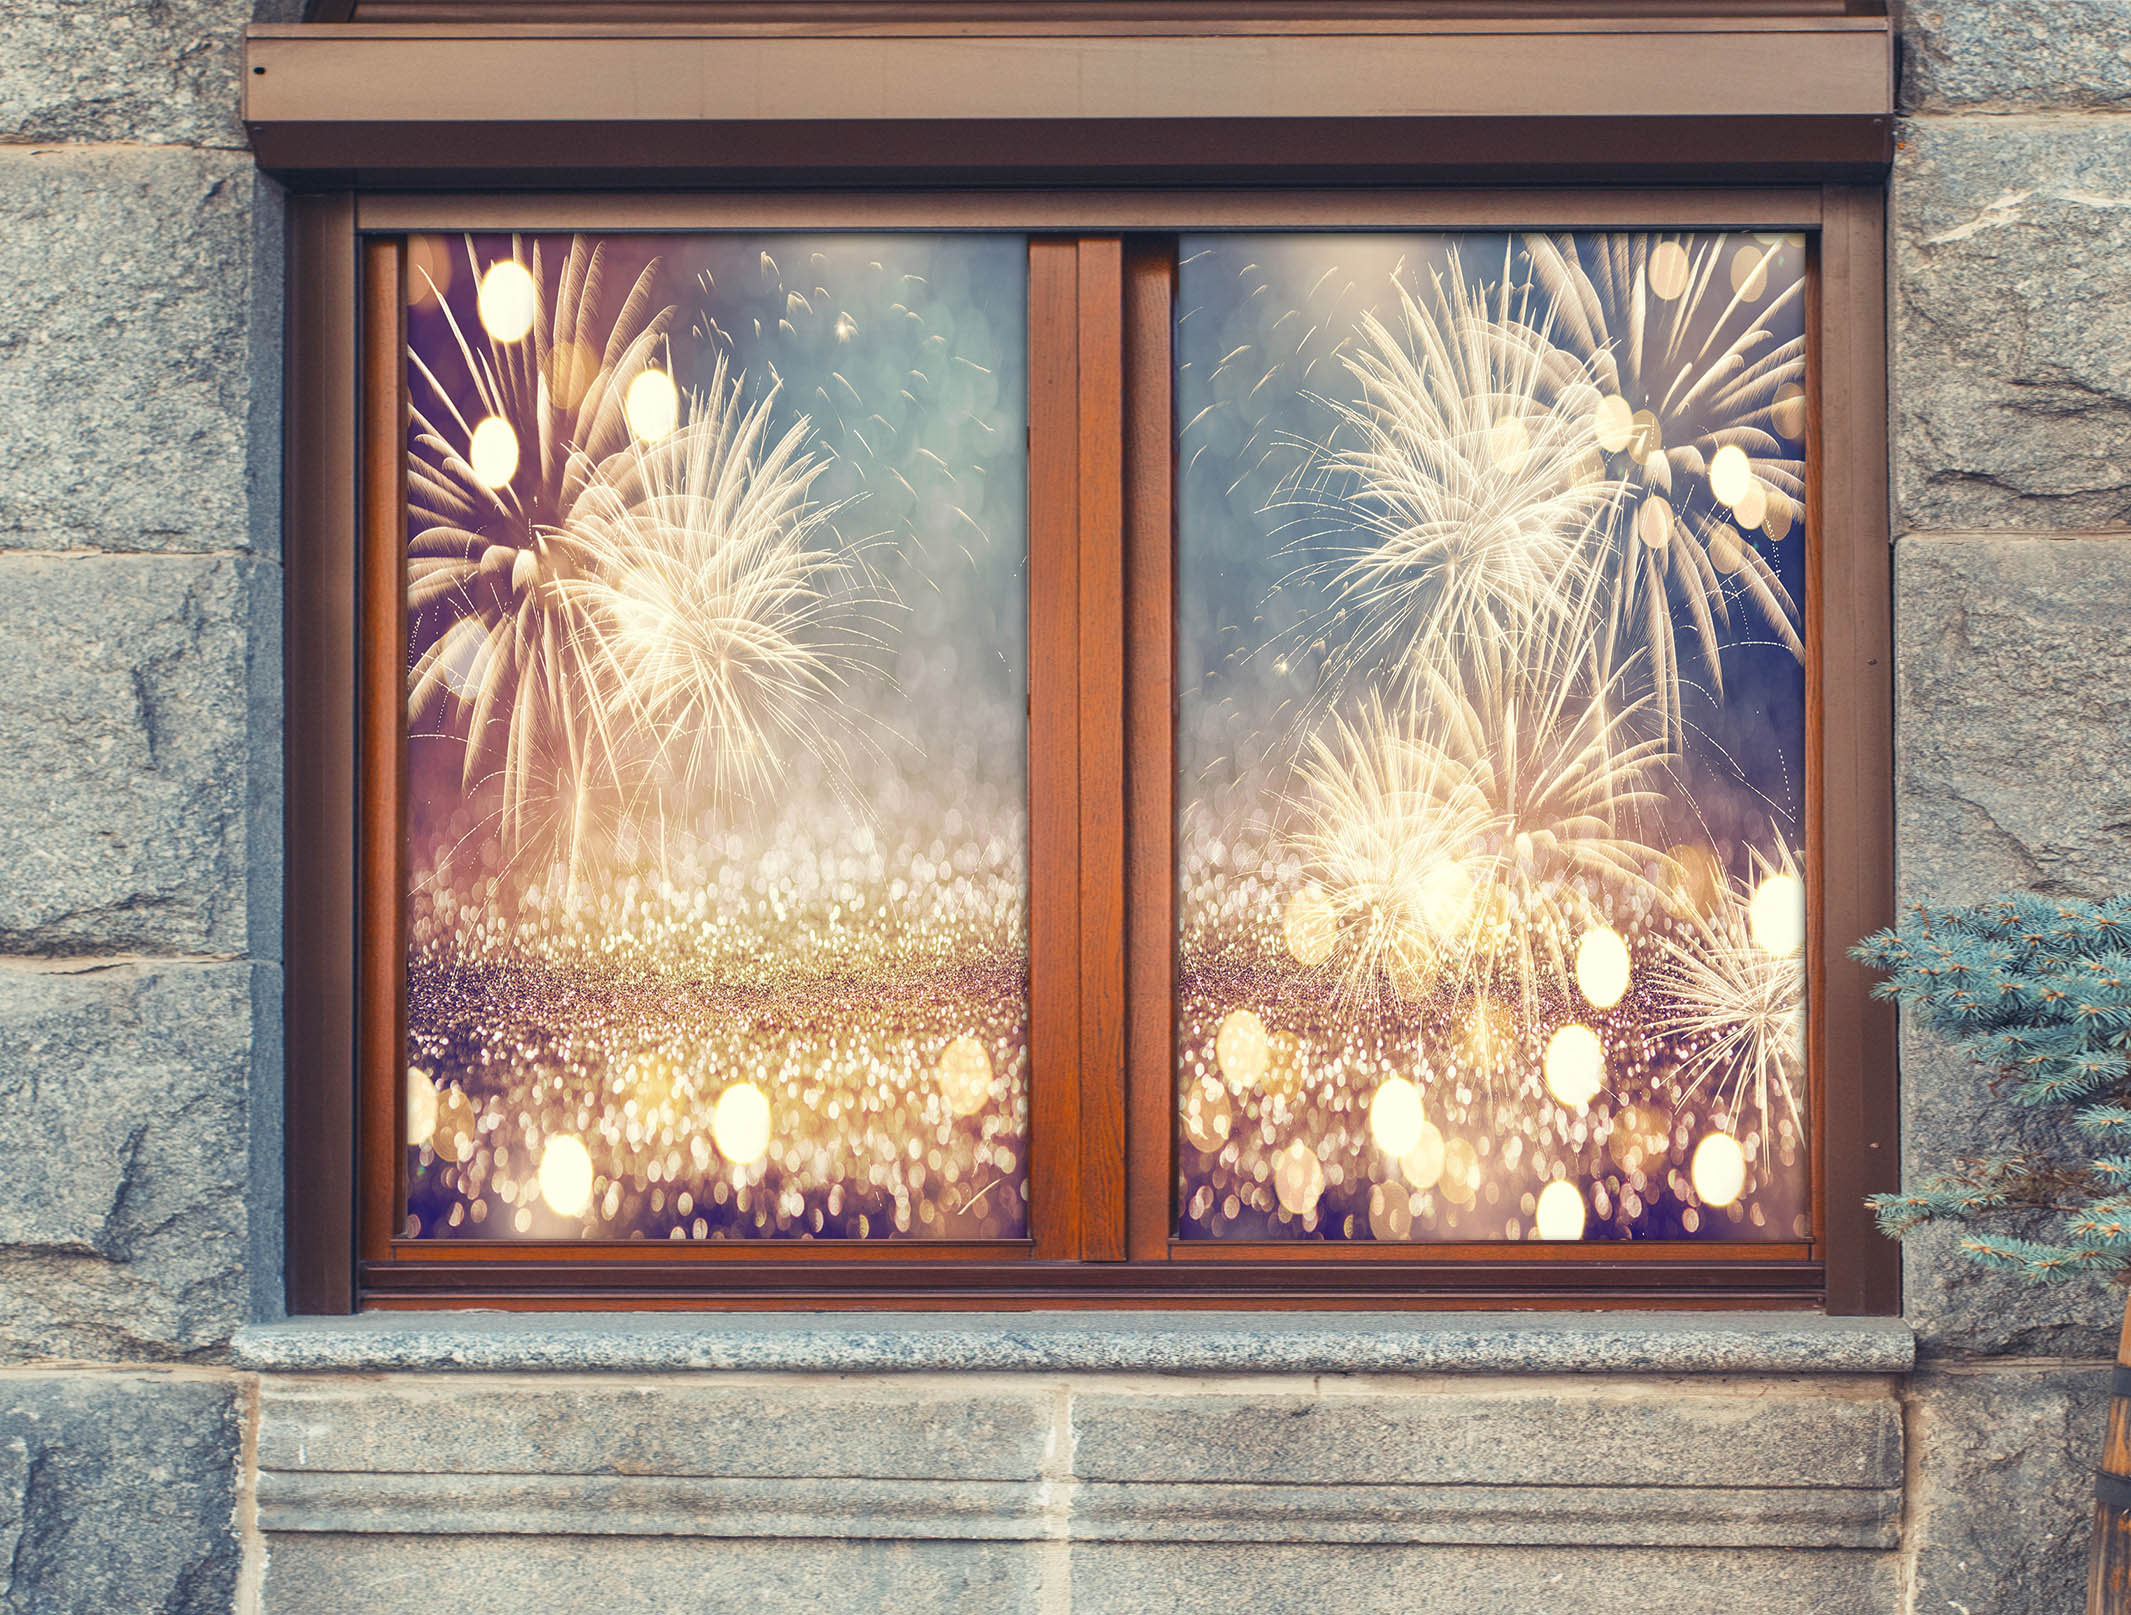 3D Fireworks 43115 Christmas Window Film Print Sticker Cling Stained Glass Xmas